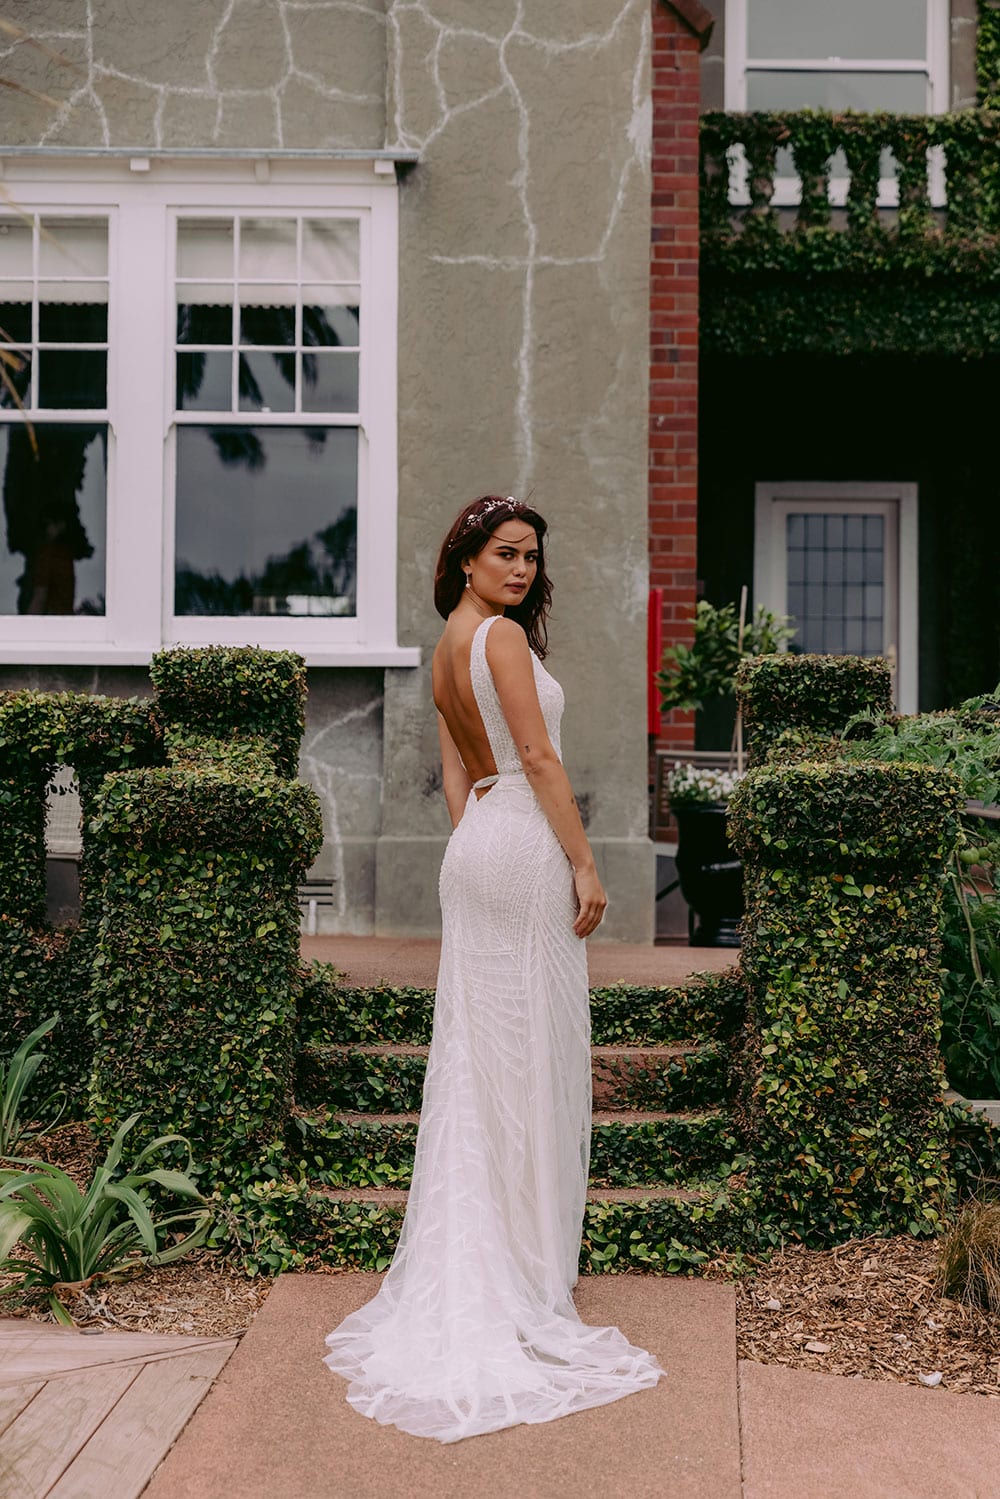 Elle Wedding gown from Vinka Design - Wedding dress with illusion neckline and deep plunge in the front with low back. Stunning beaded embroidery over a stretch base that sculpts and flatters the figure and falls into a beautiful flared train. Model wearing gown in beautiful gardens showing dress low back.